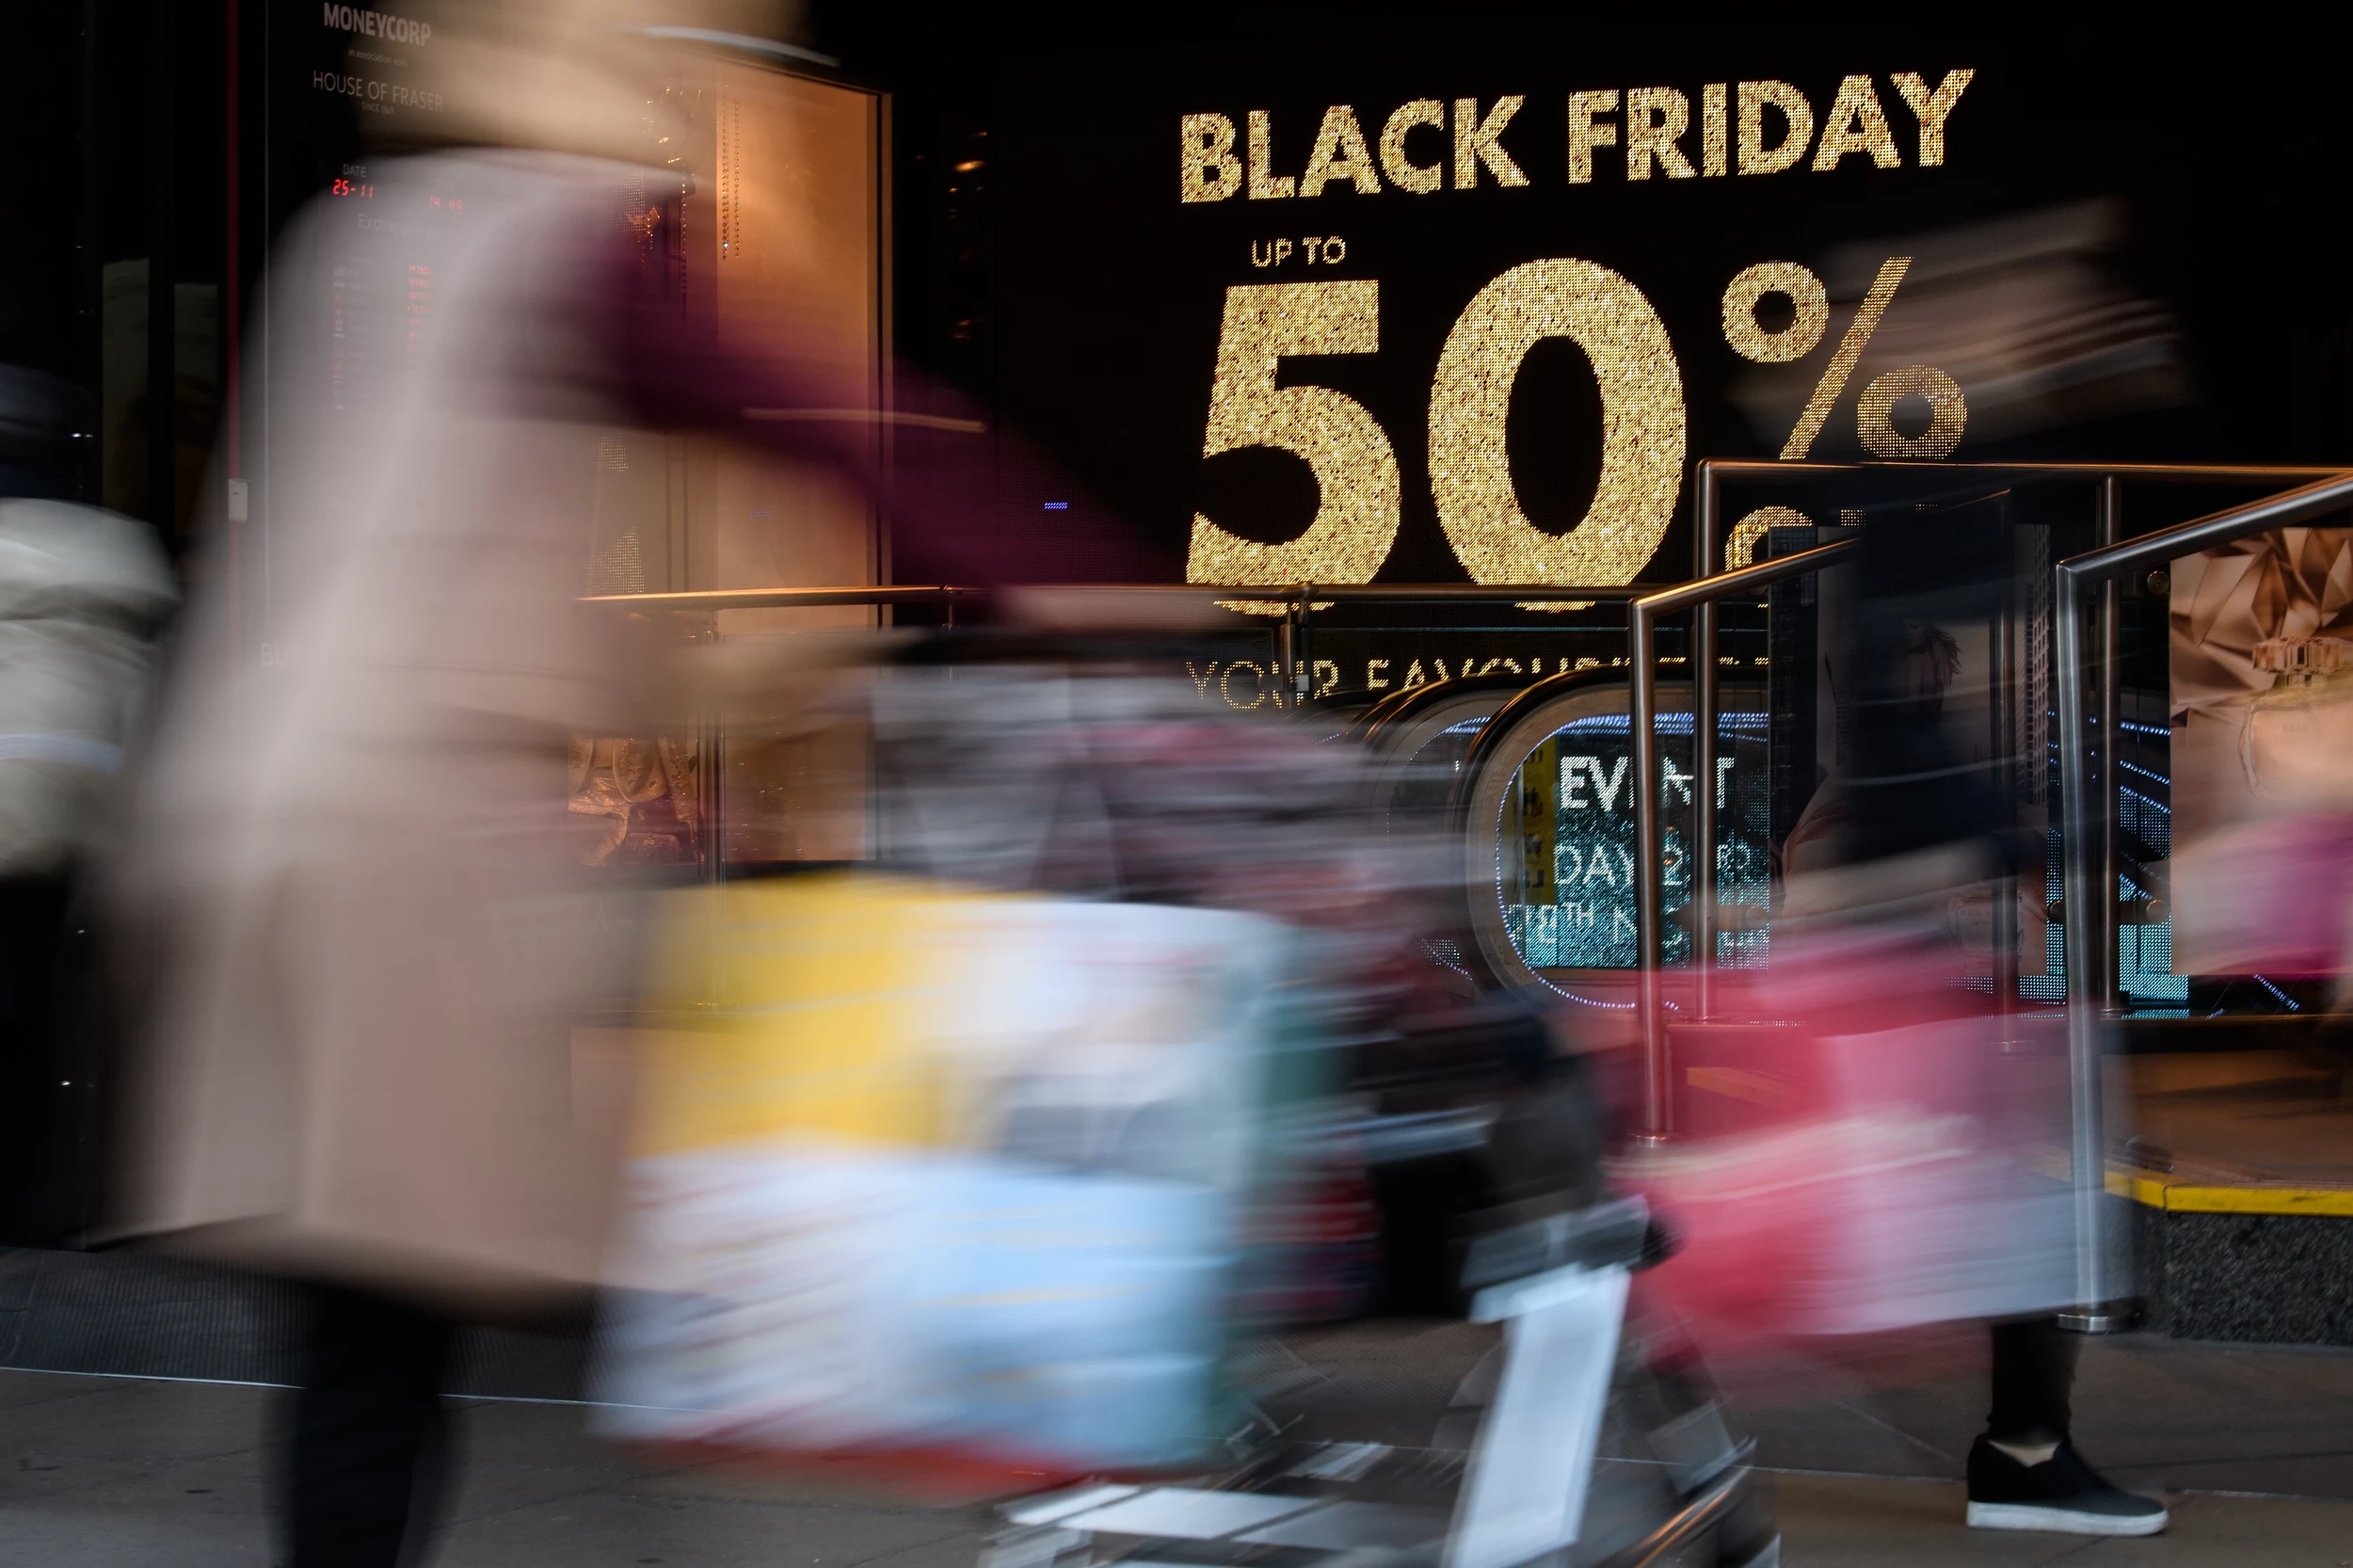 Black Friday Shopping Isn't as Hard as You Think